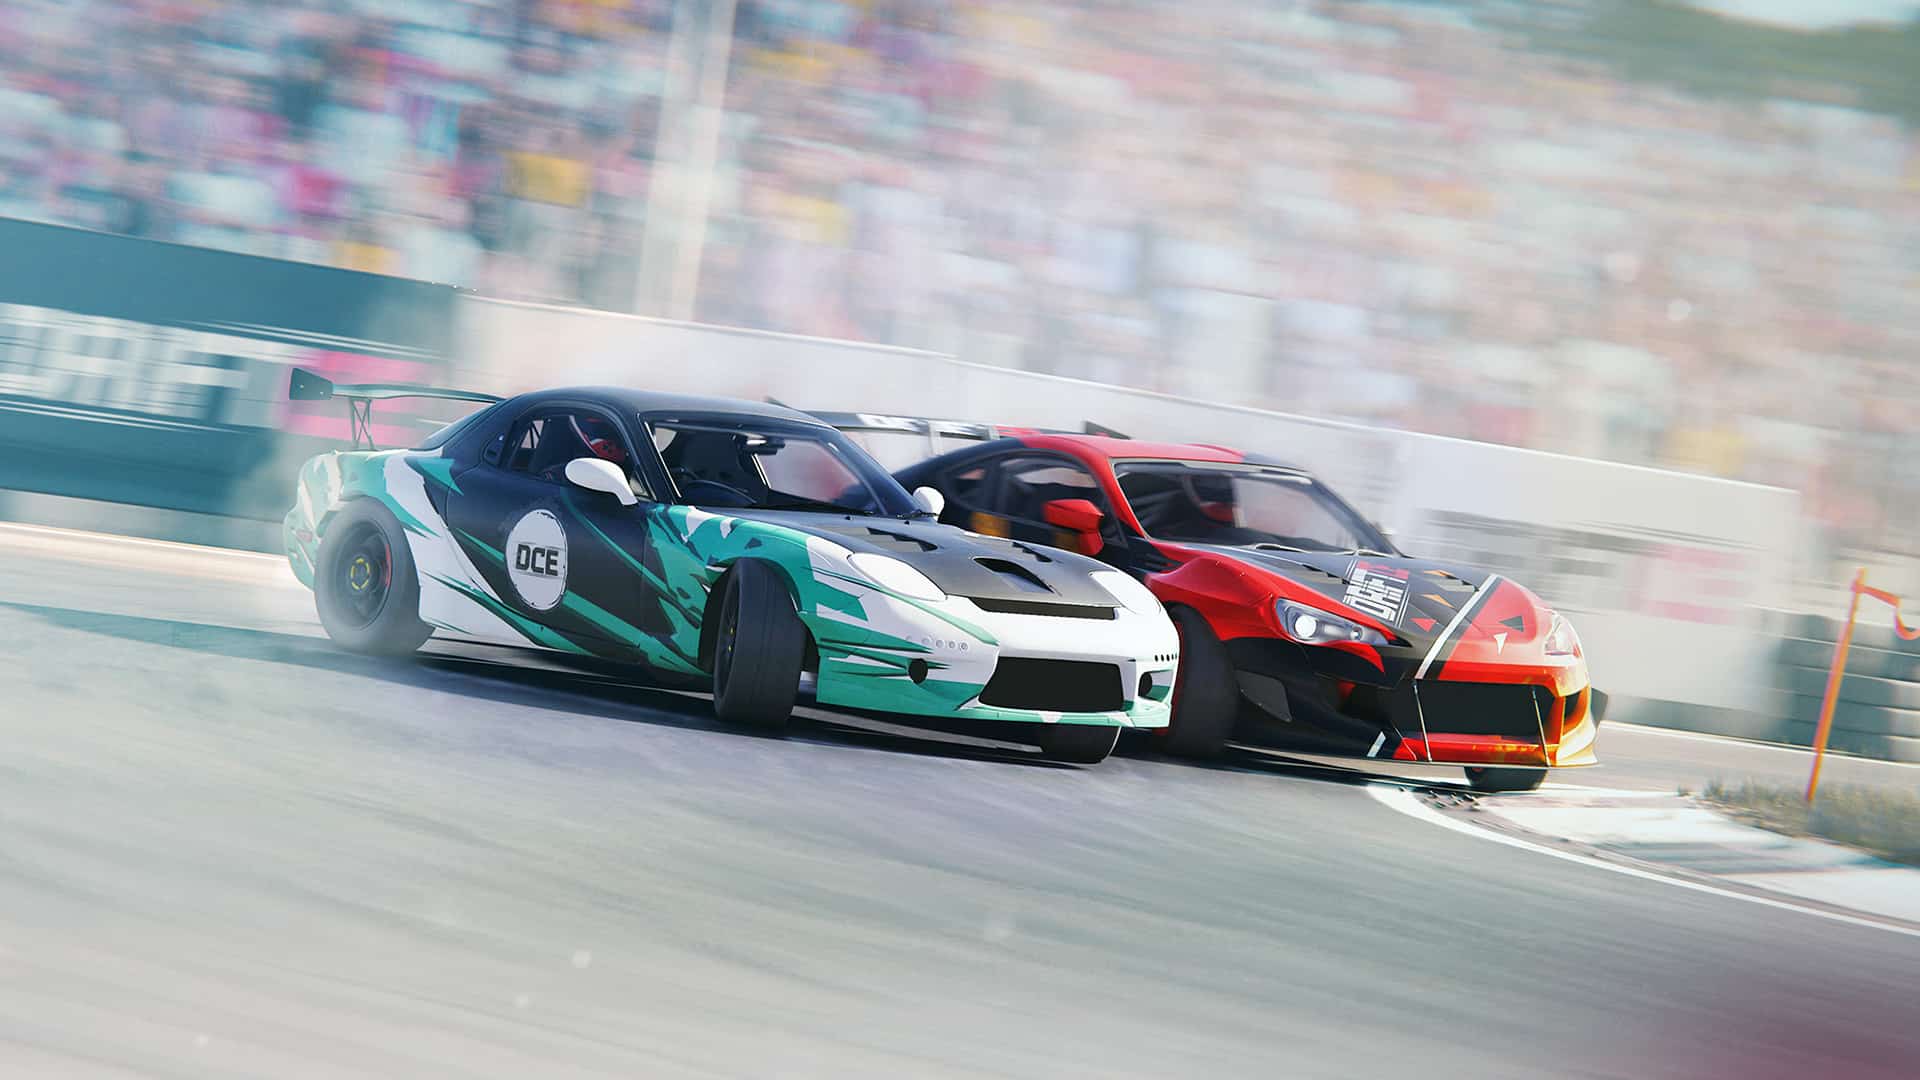 DRIFTCE Car List: Every car in the new console drift racing game